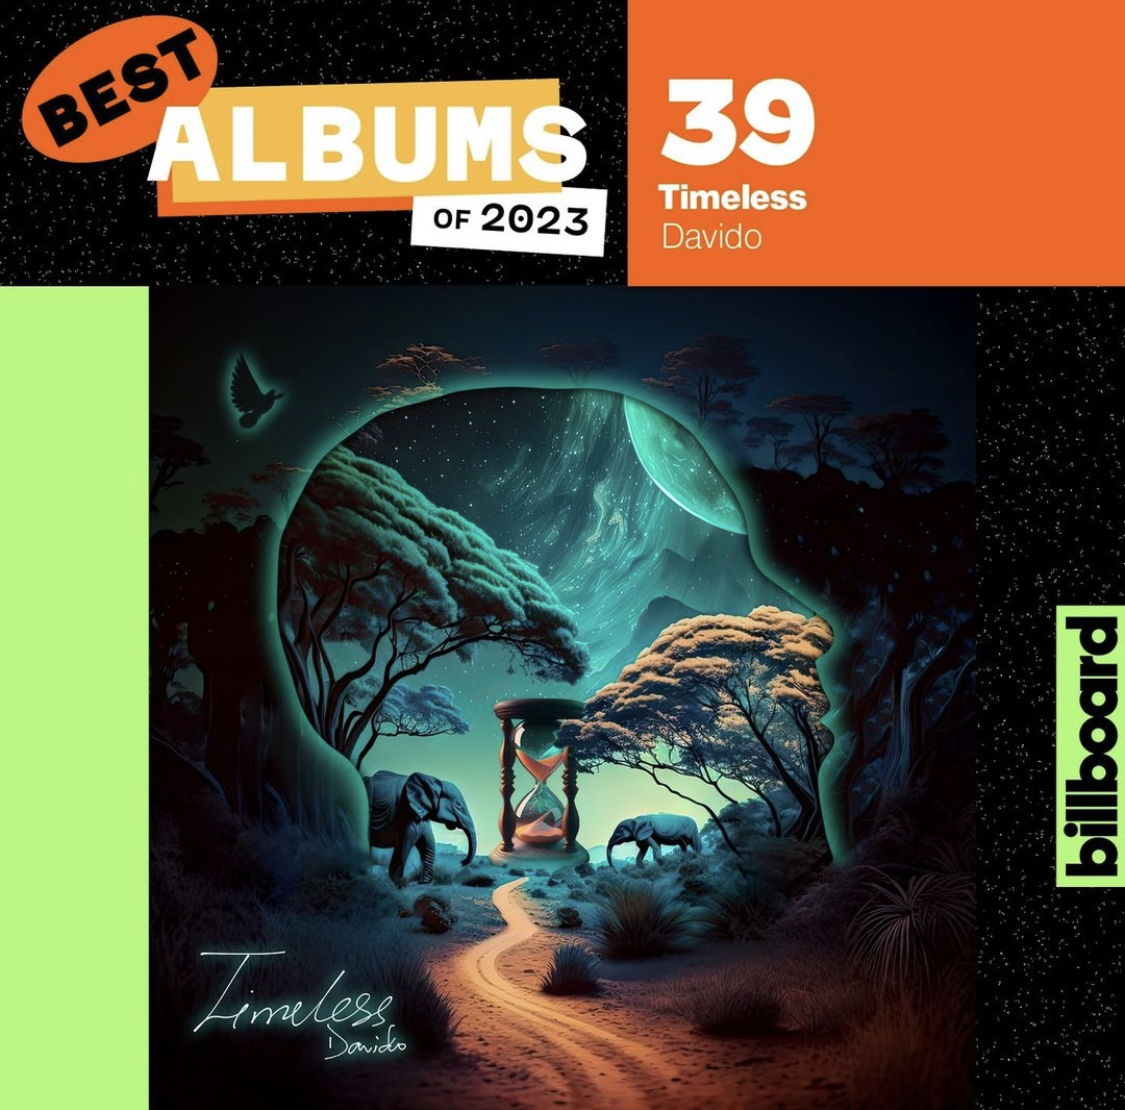 The 50 Best Albums of 2023